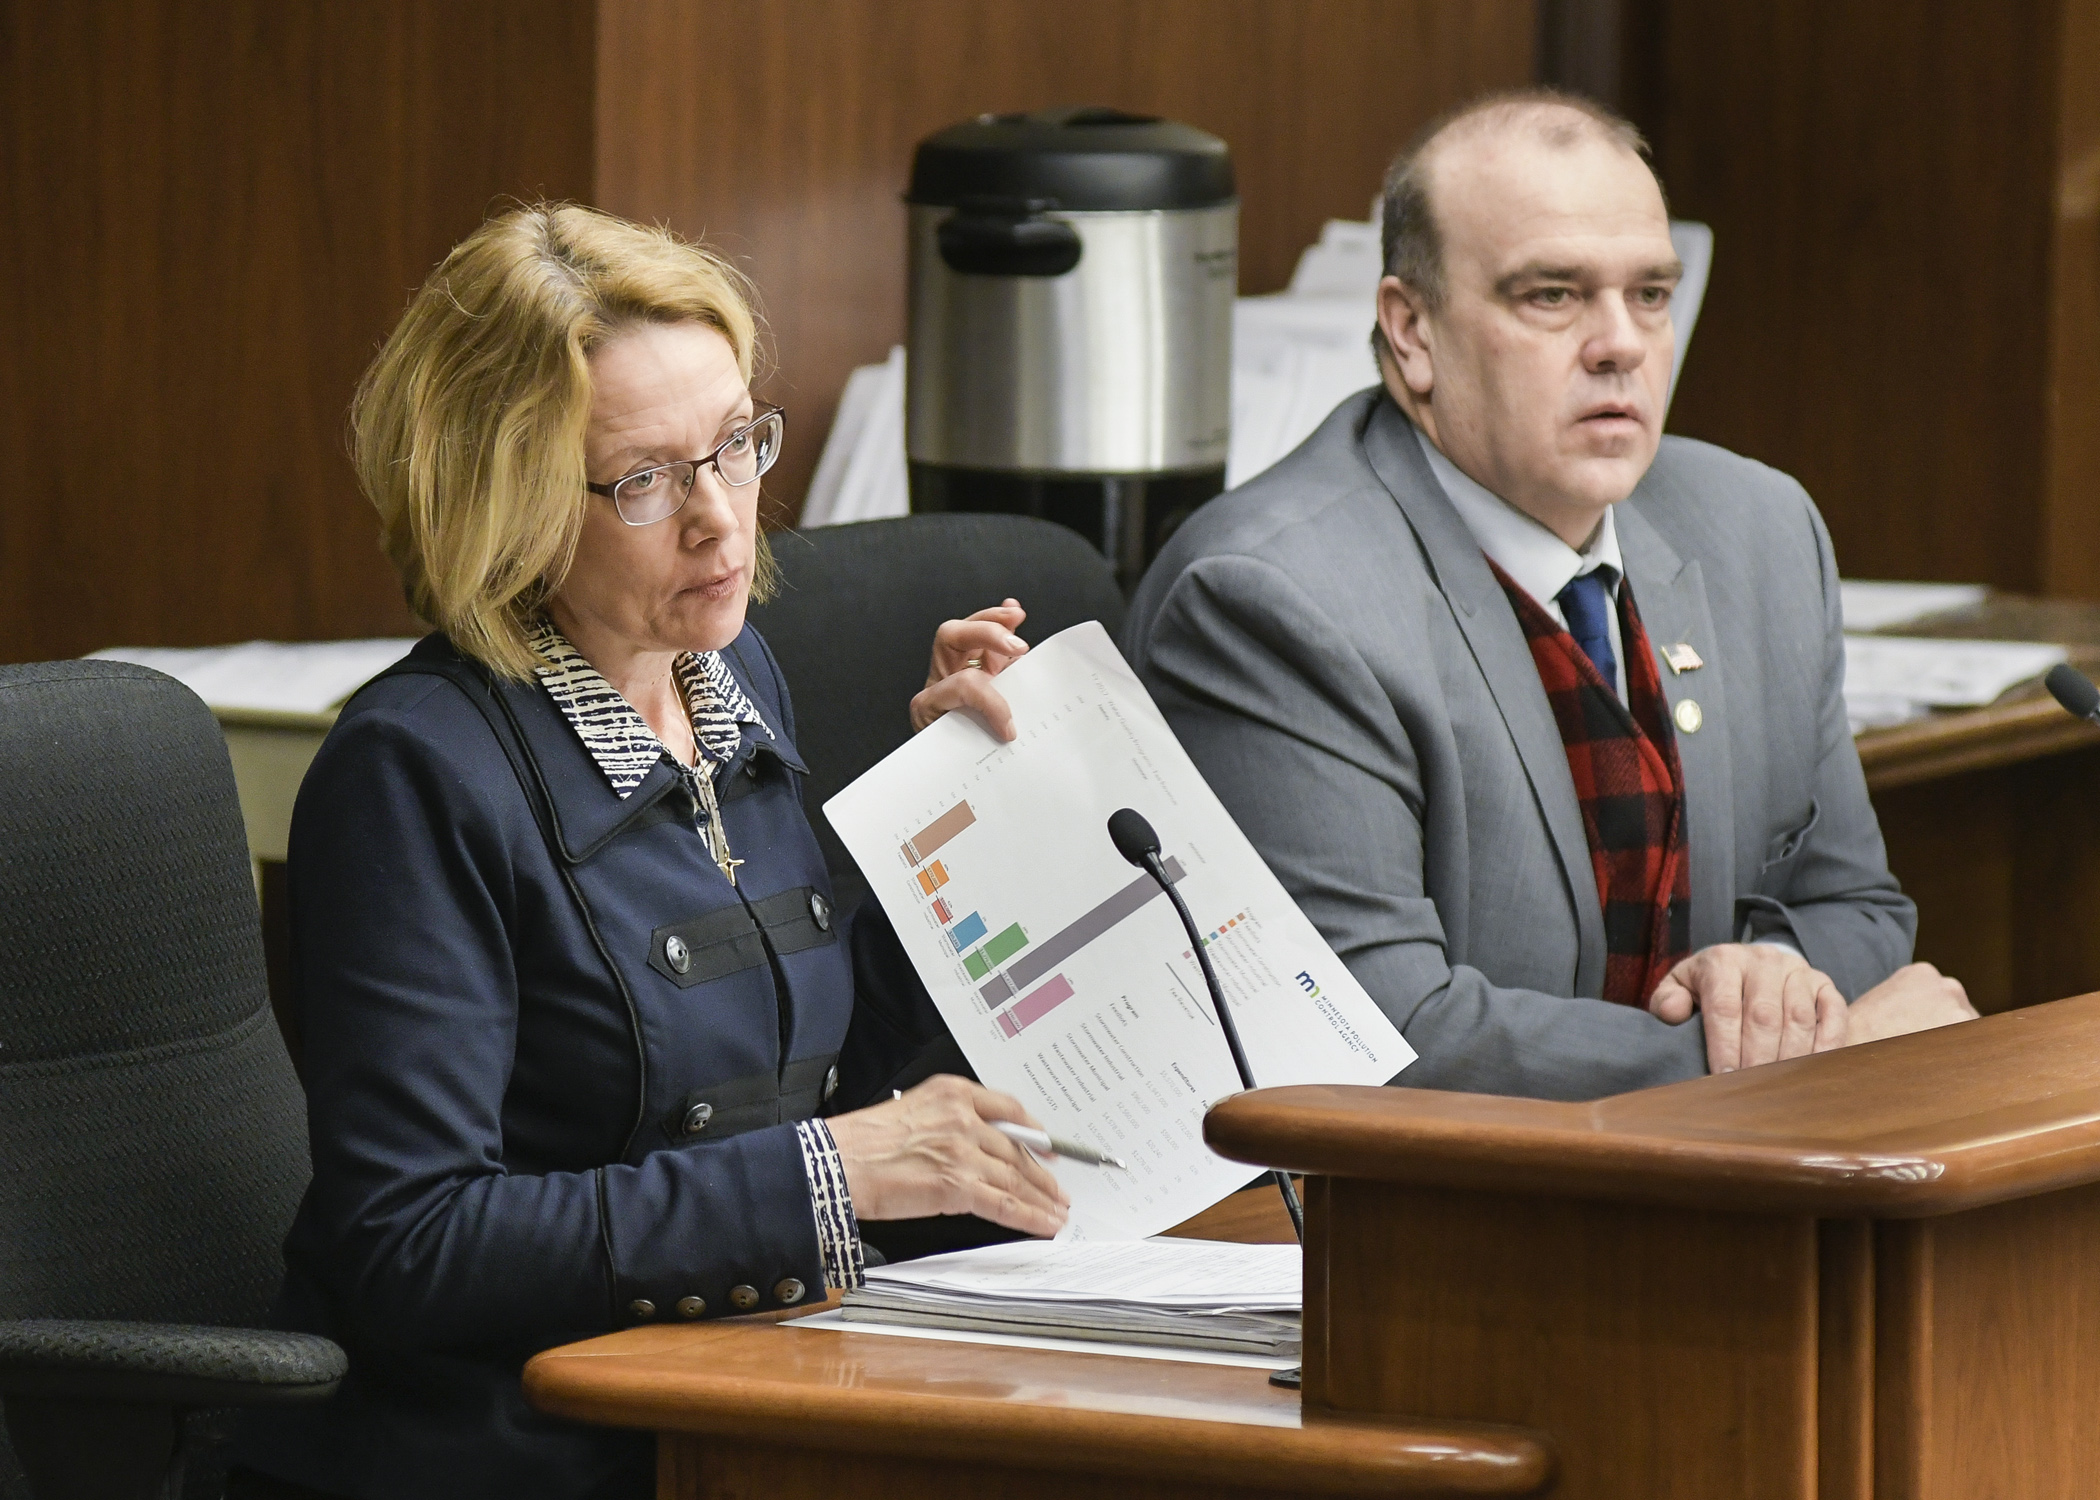 Greta Gauthier, legislative director for the MPCA, testifies March 21 before the House Environment and Natural Resources Policy and Finance Committee on a bill sponsored by Rep. Matt Bliss, right. Photo by Andrew VonBank